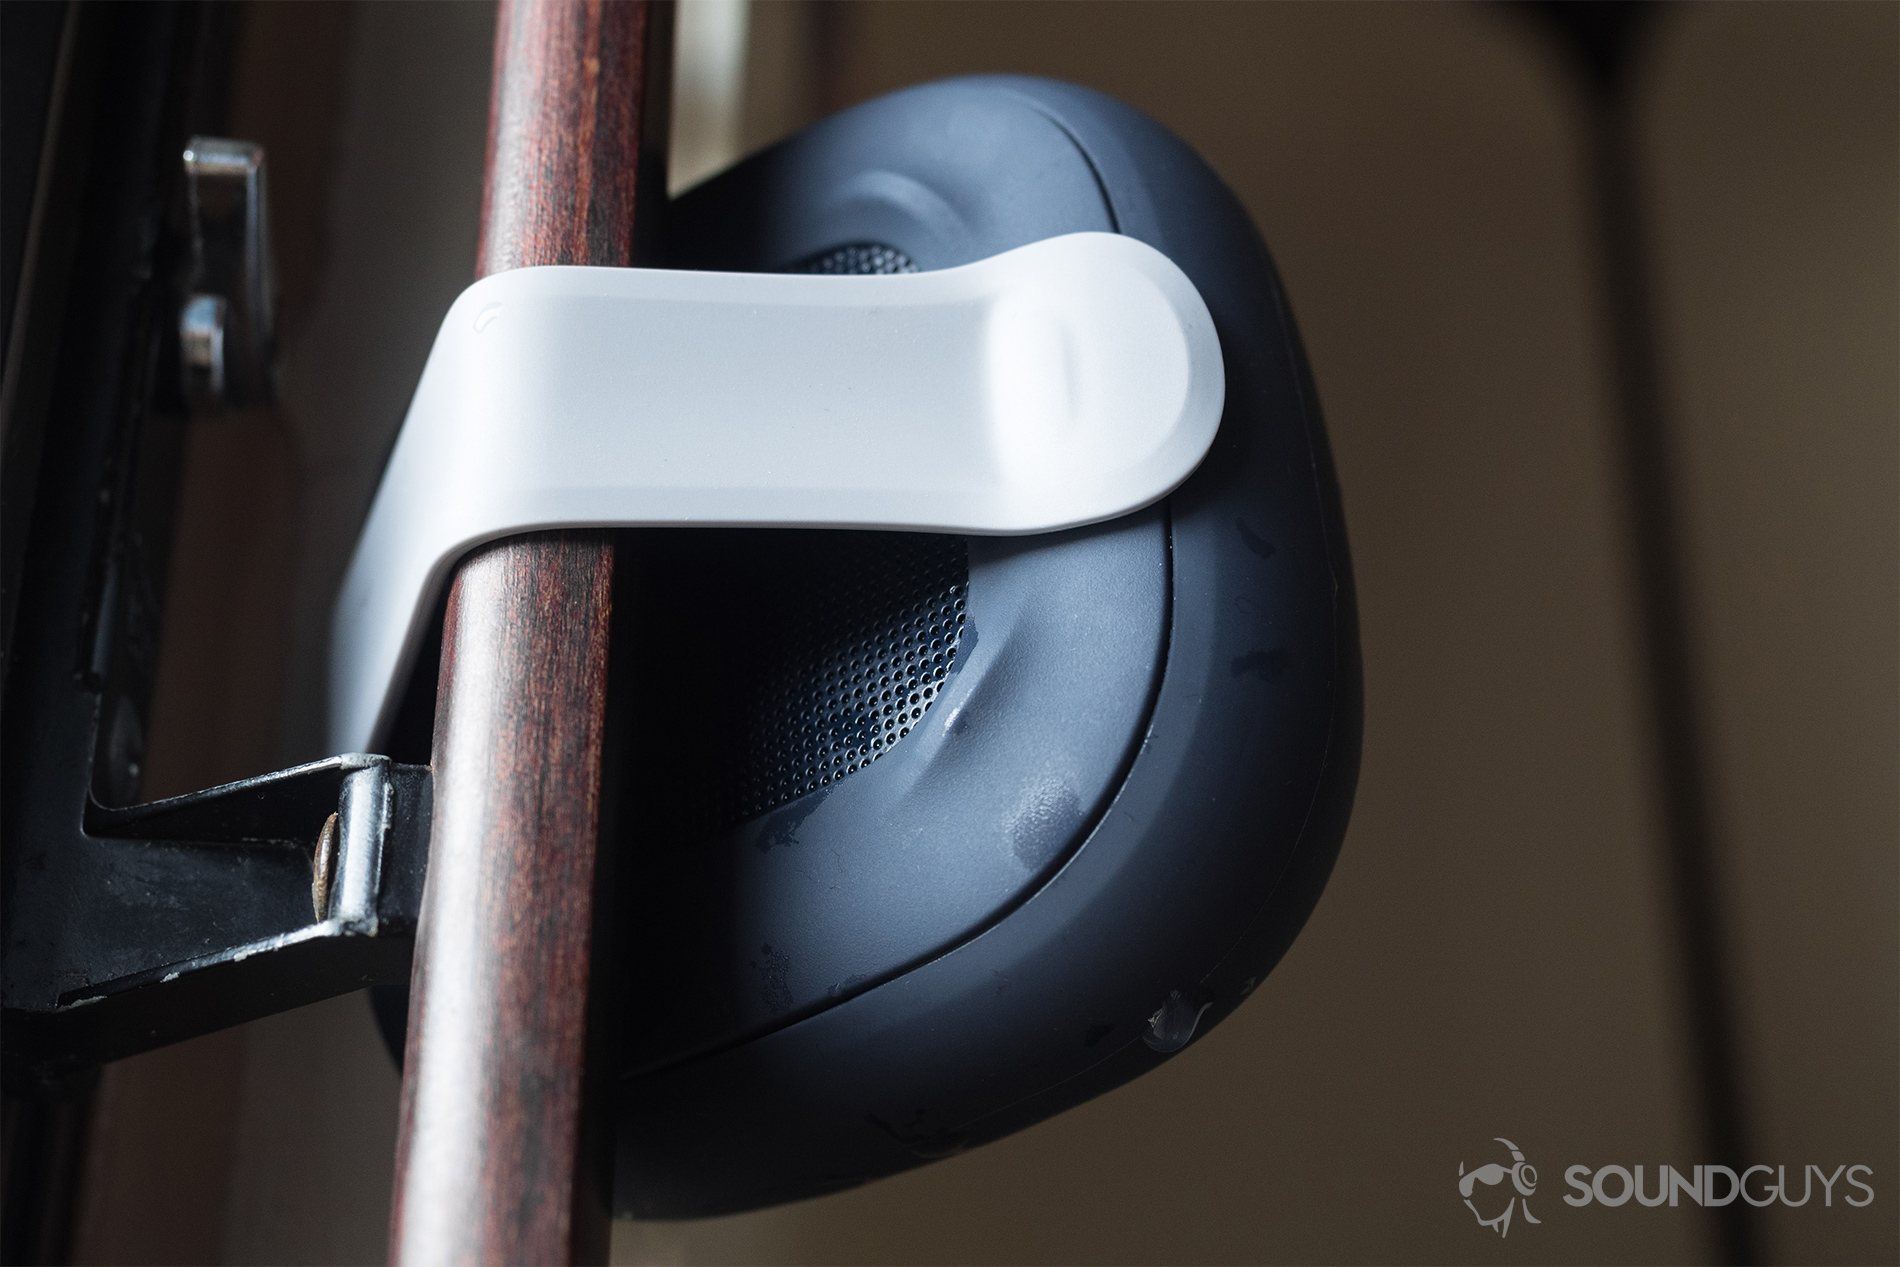 The Bose SoundLink Micro (blue) hooked around a sliding door handle. It's a rear, up-facing photo.